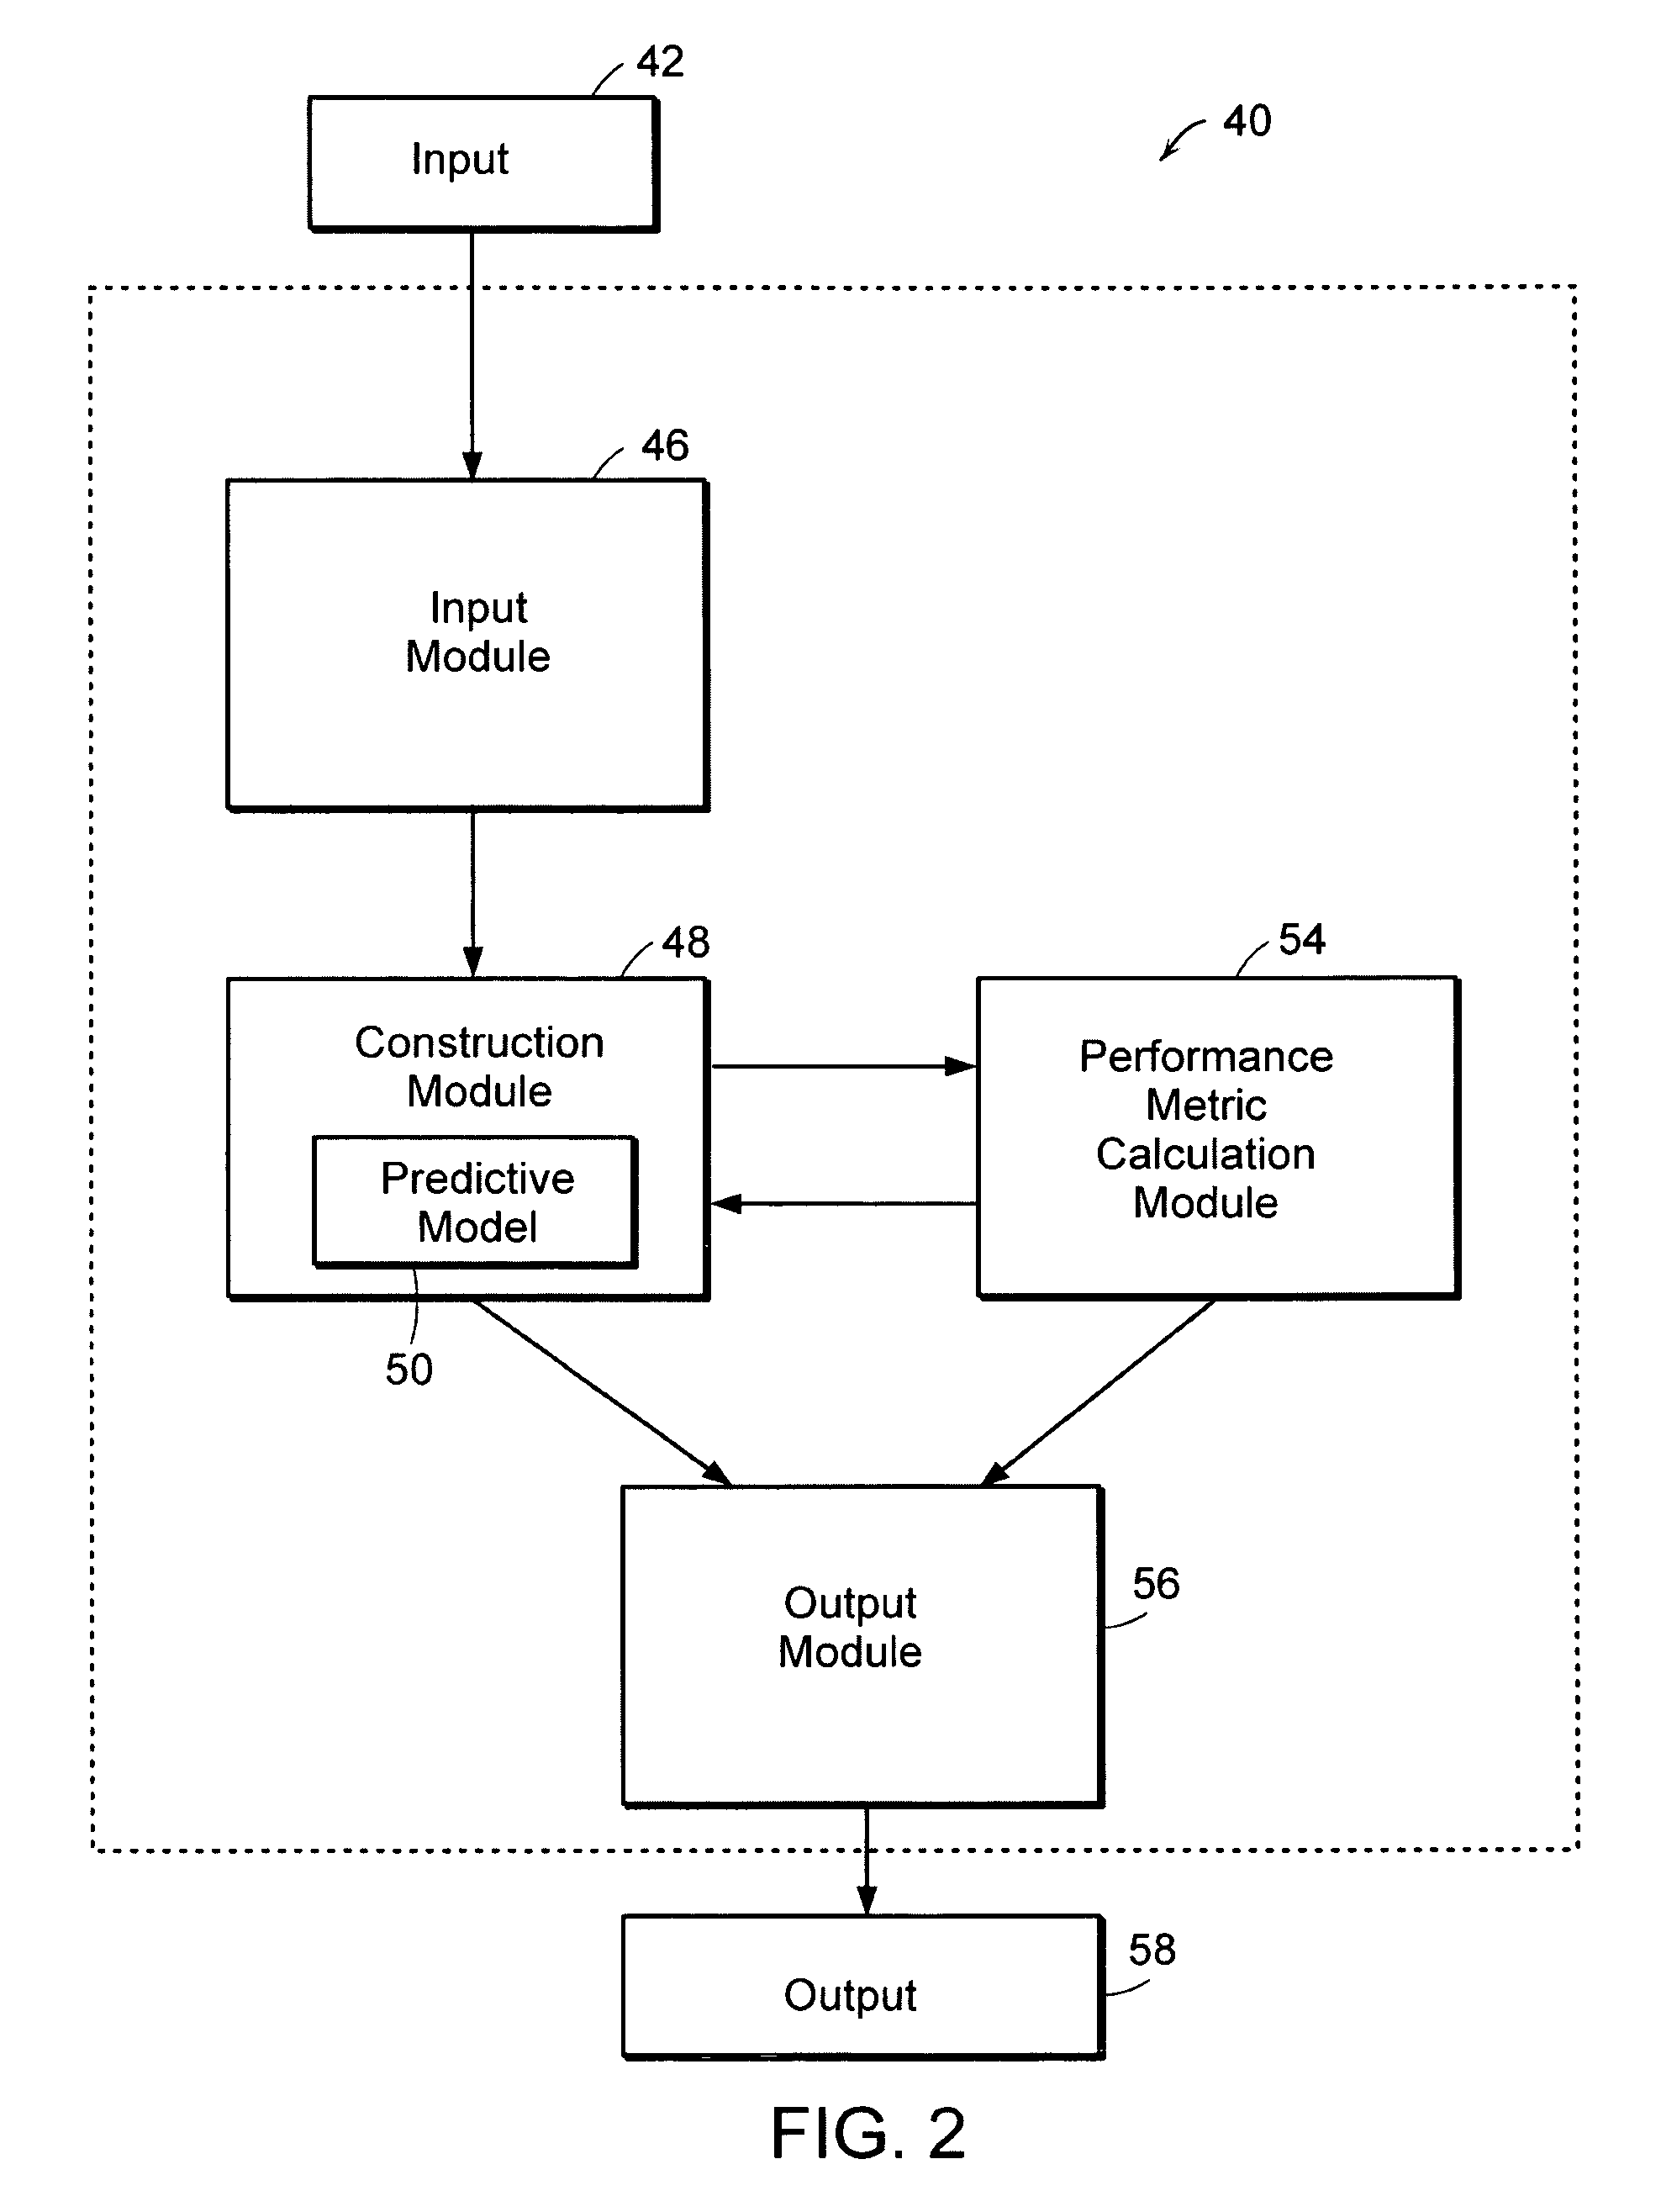 System and method for multi-phase system development with predictive modeling